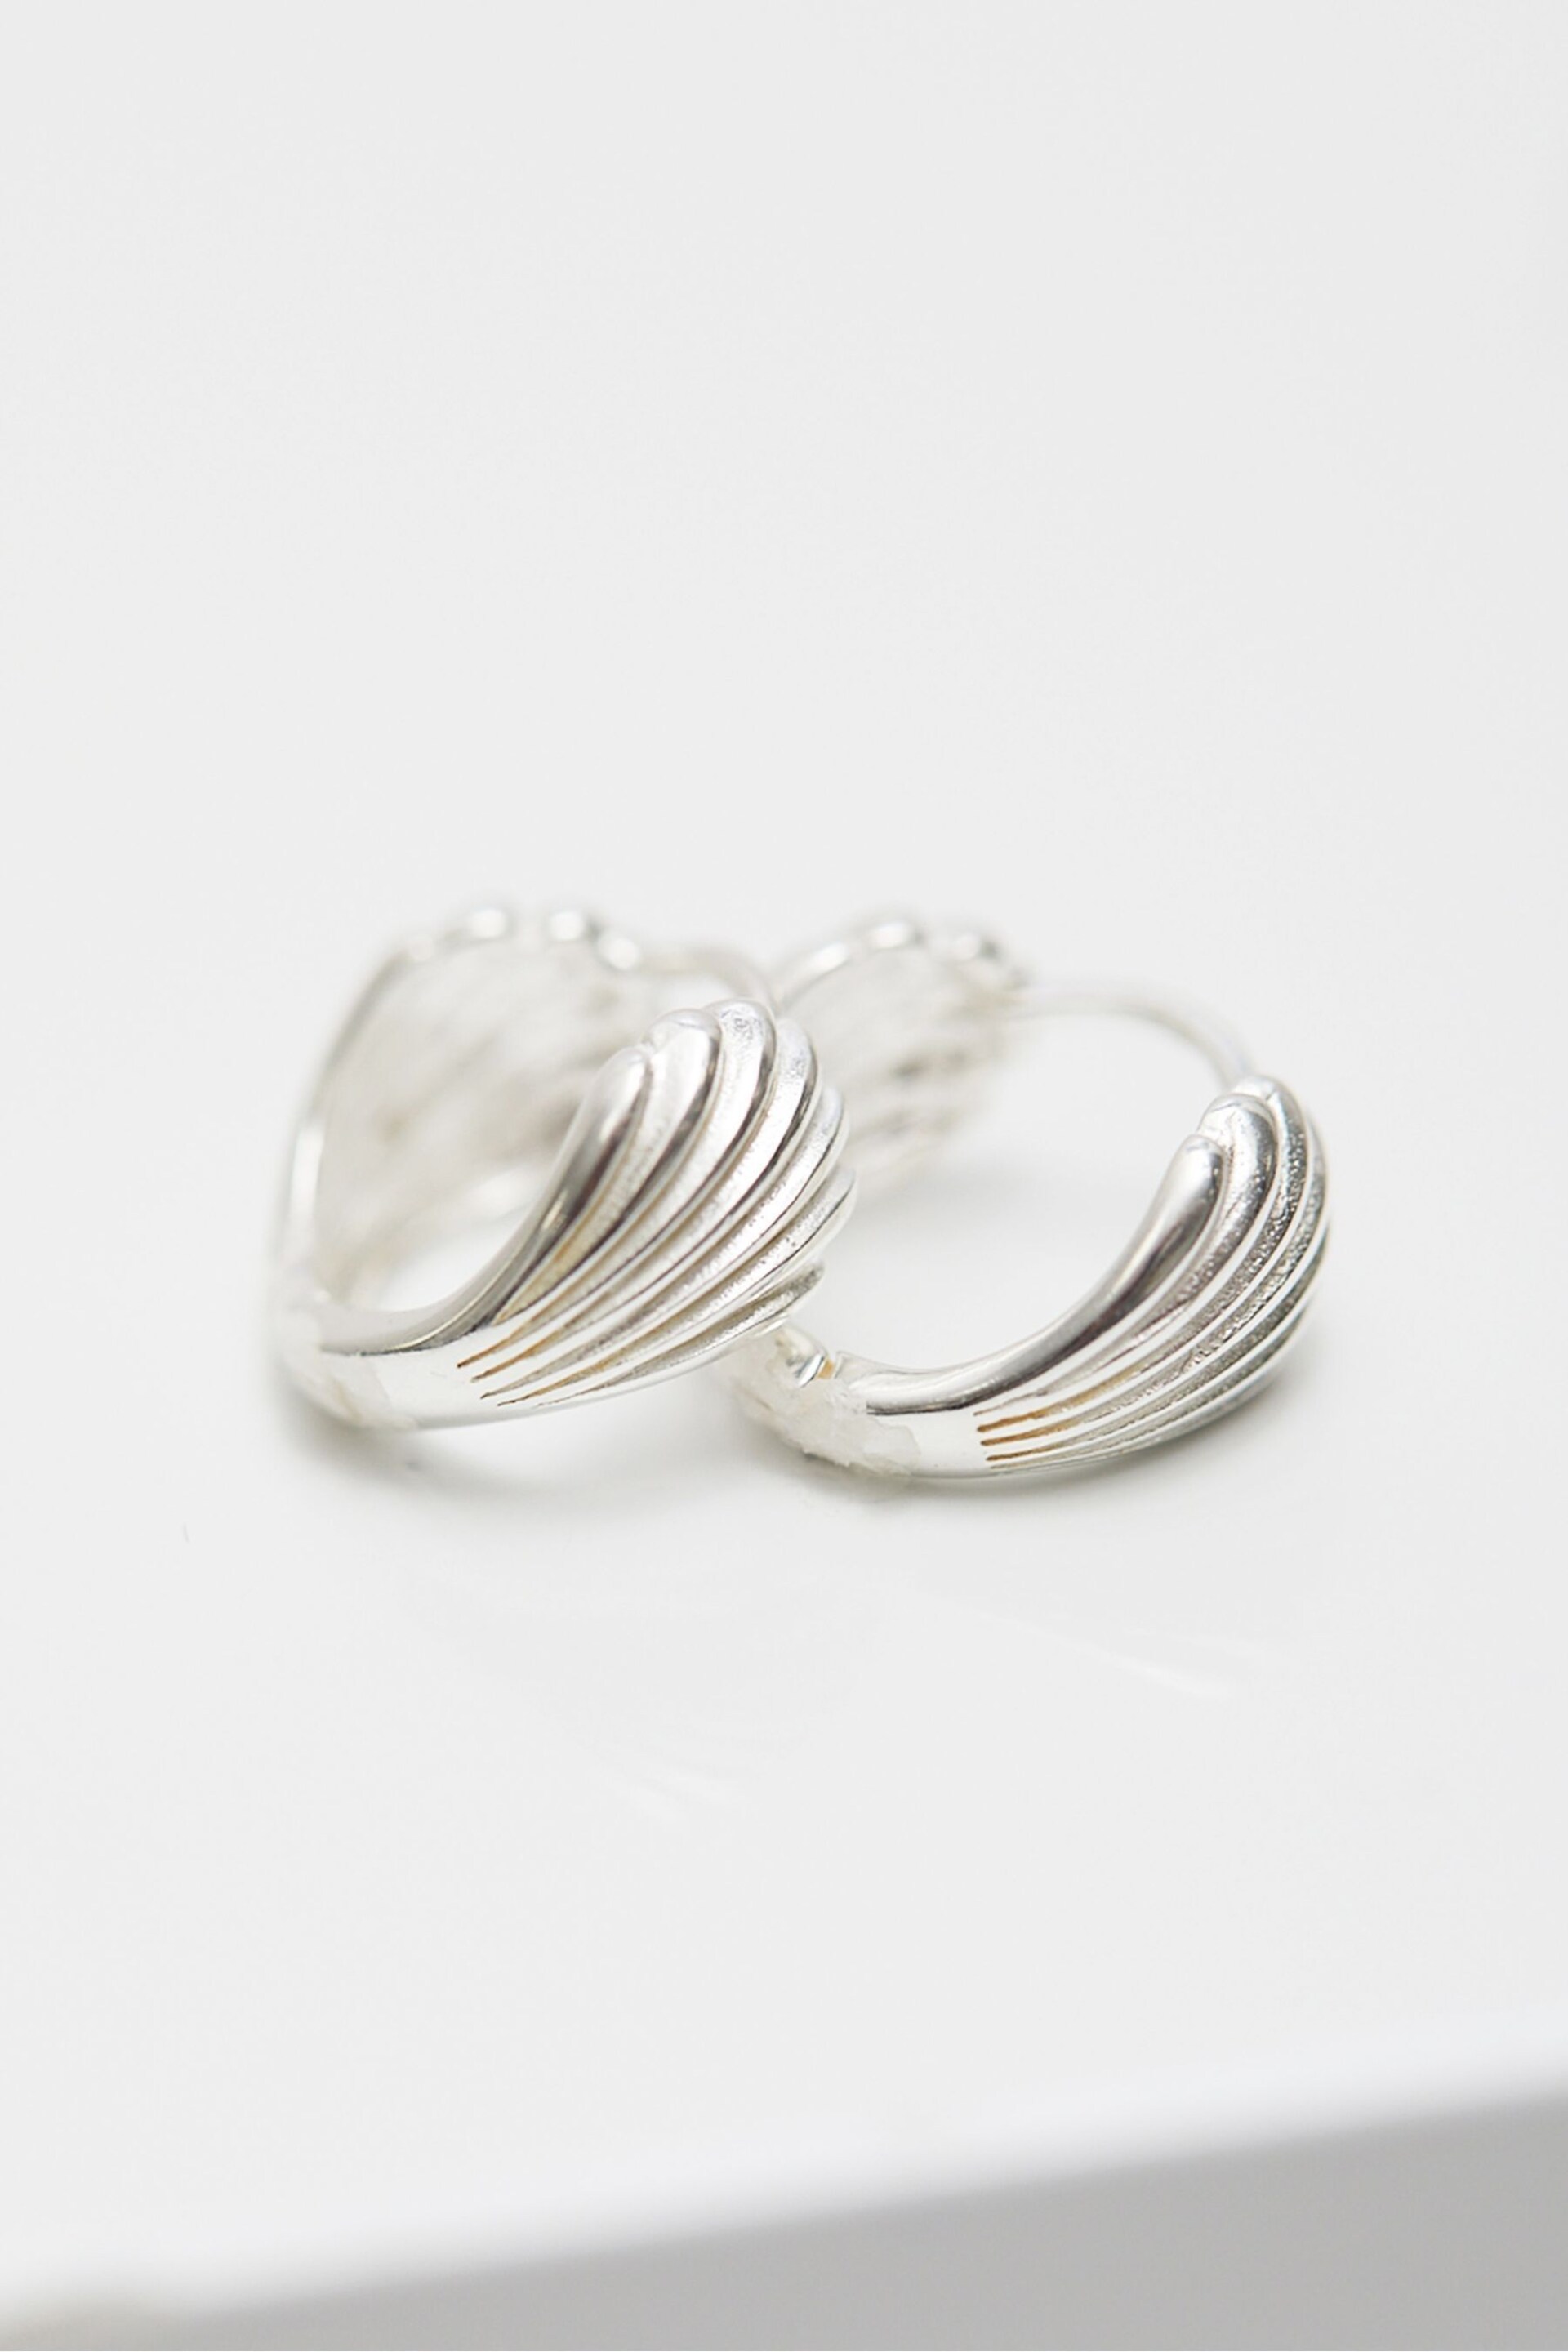 Simply Silver Sterling Silver Tone 925 Shell Hoop Earrings - Image 1 of 3